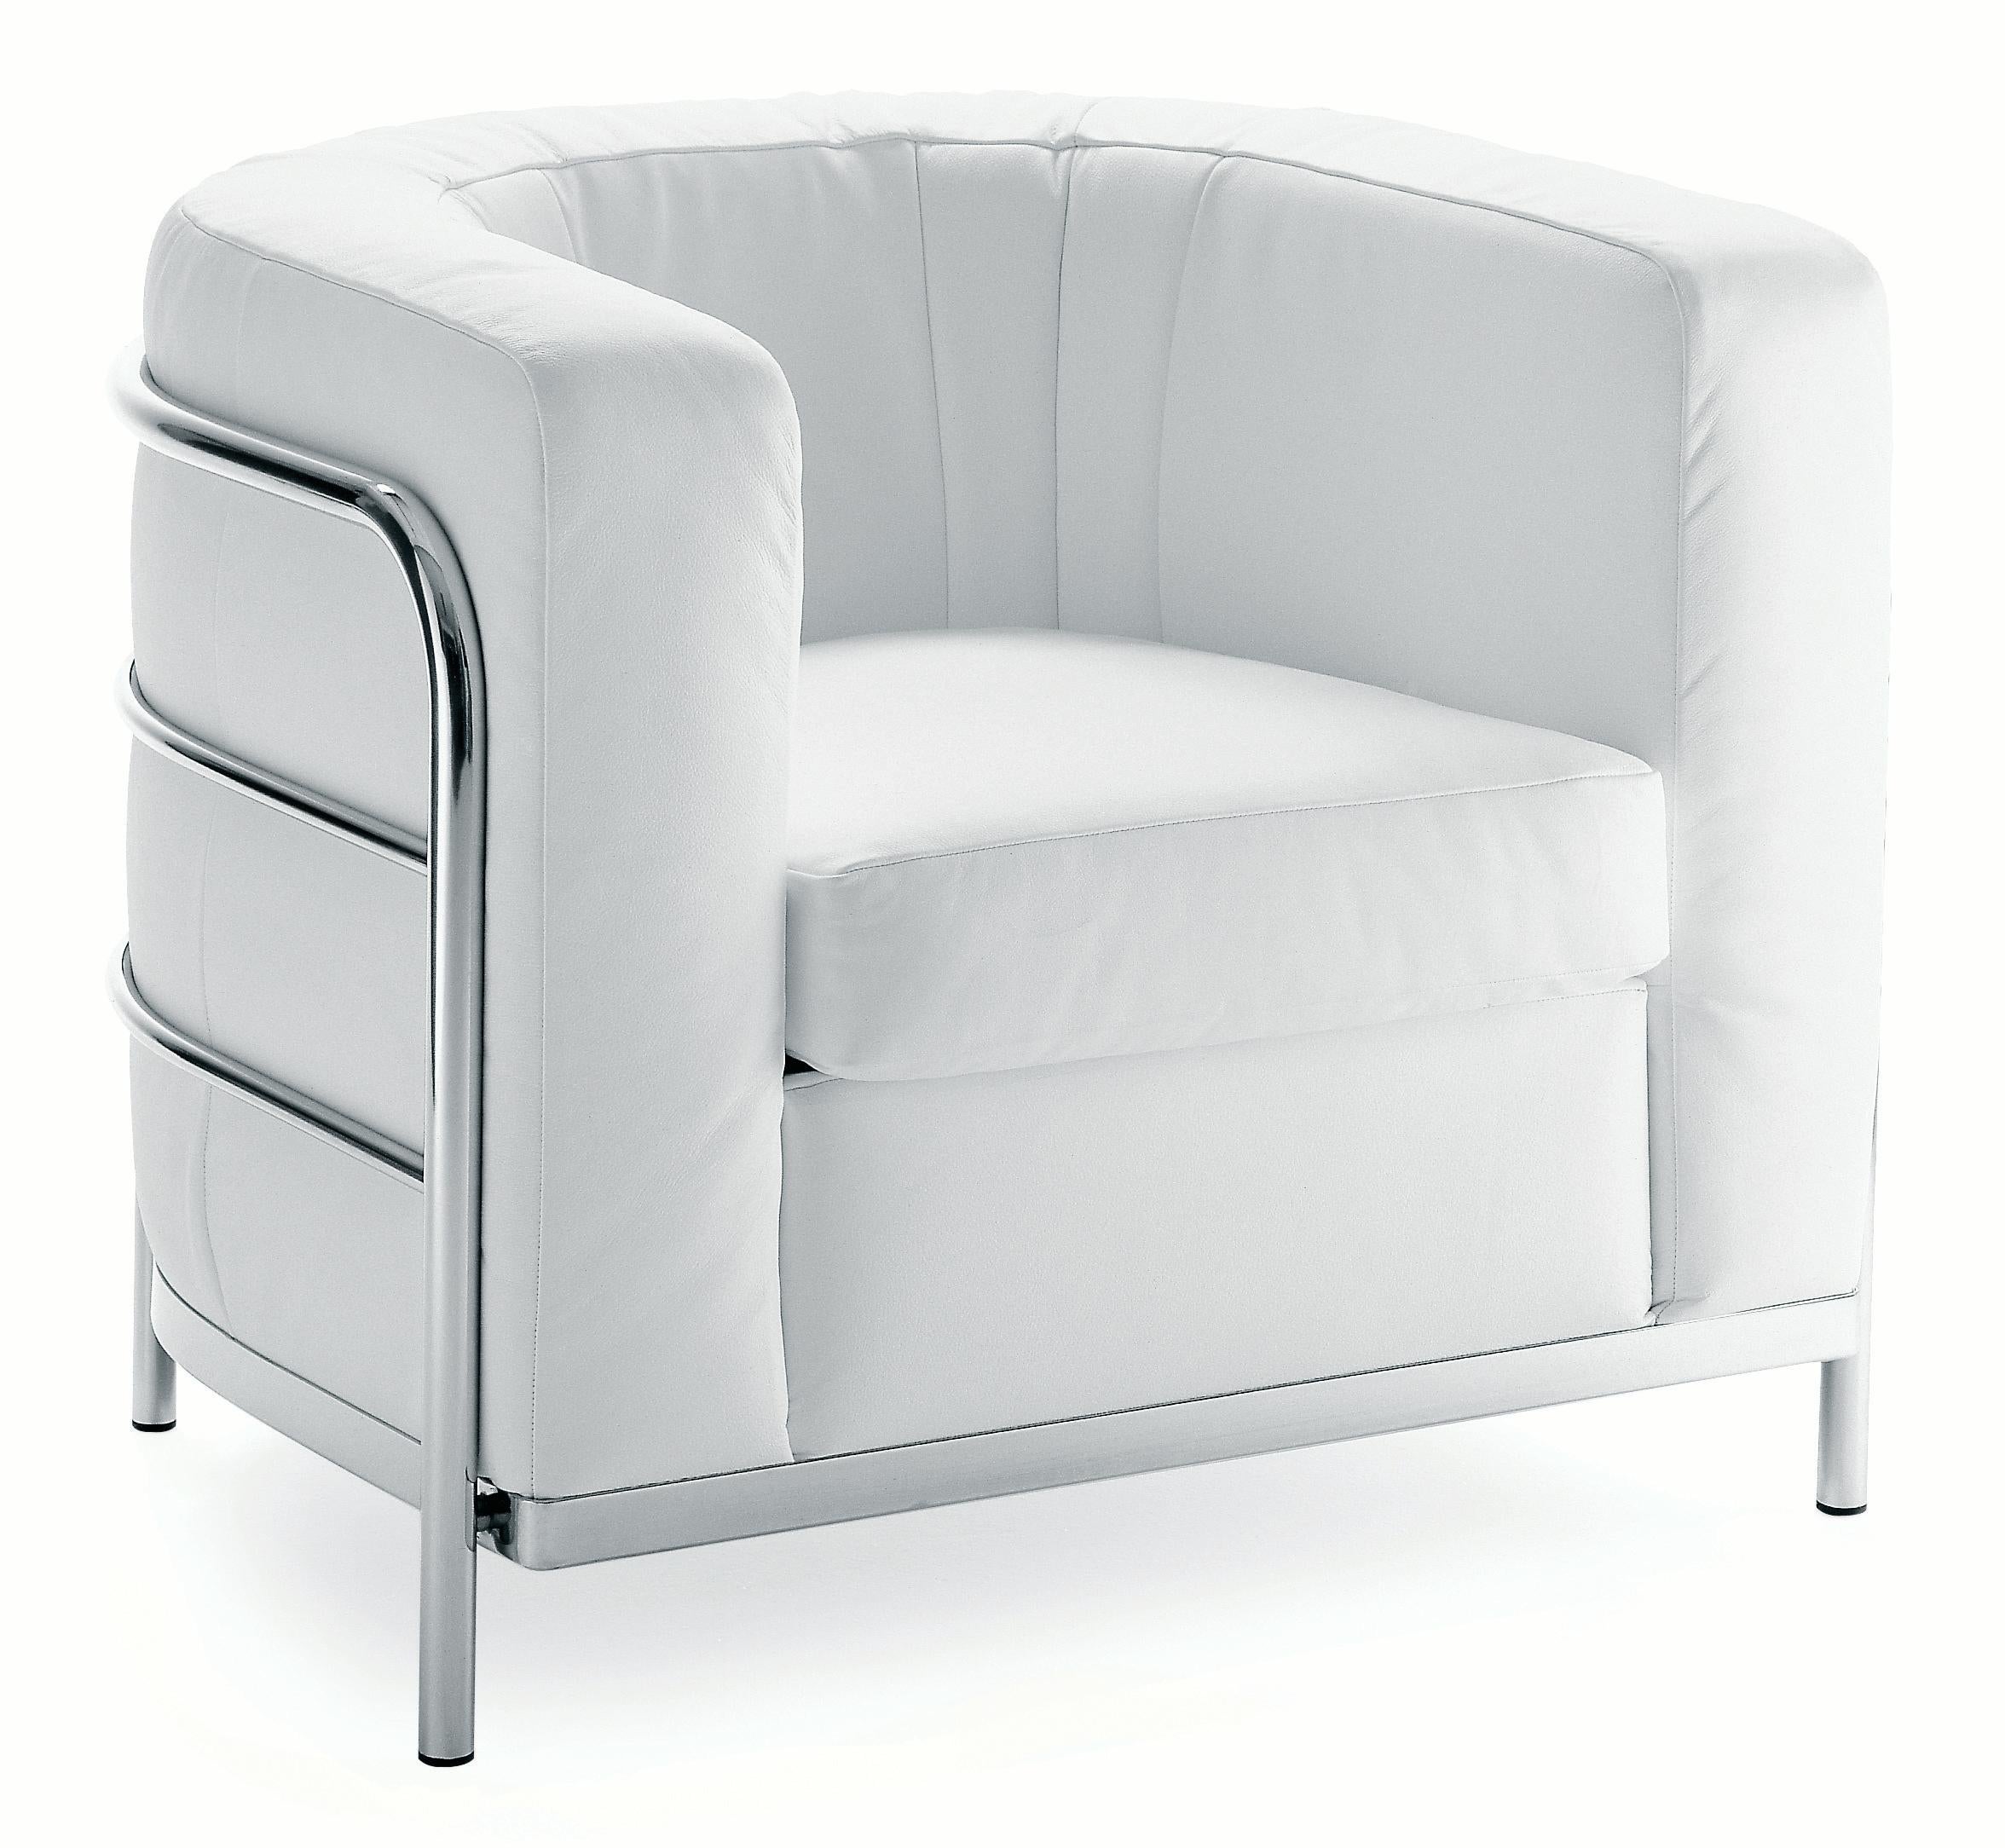 Zanotta Onda Armchair in White Leather with Stainless Steel Tubular Frame by De Pas, D’Urbino, Lomazzi

18/8 stainless steel tubular frame. Upholstery in graduated polyurethane/ heat-bound polyester fibre. Removable fabric or leather cover. The